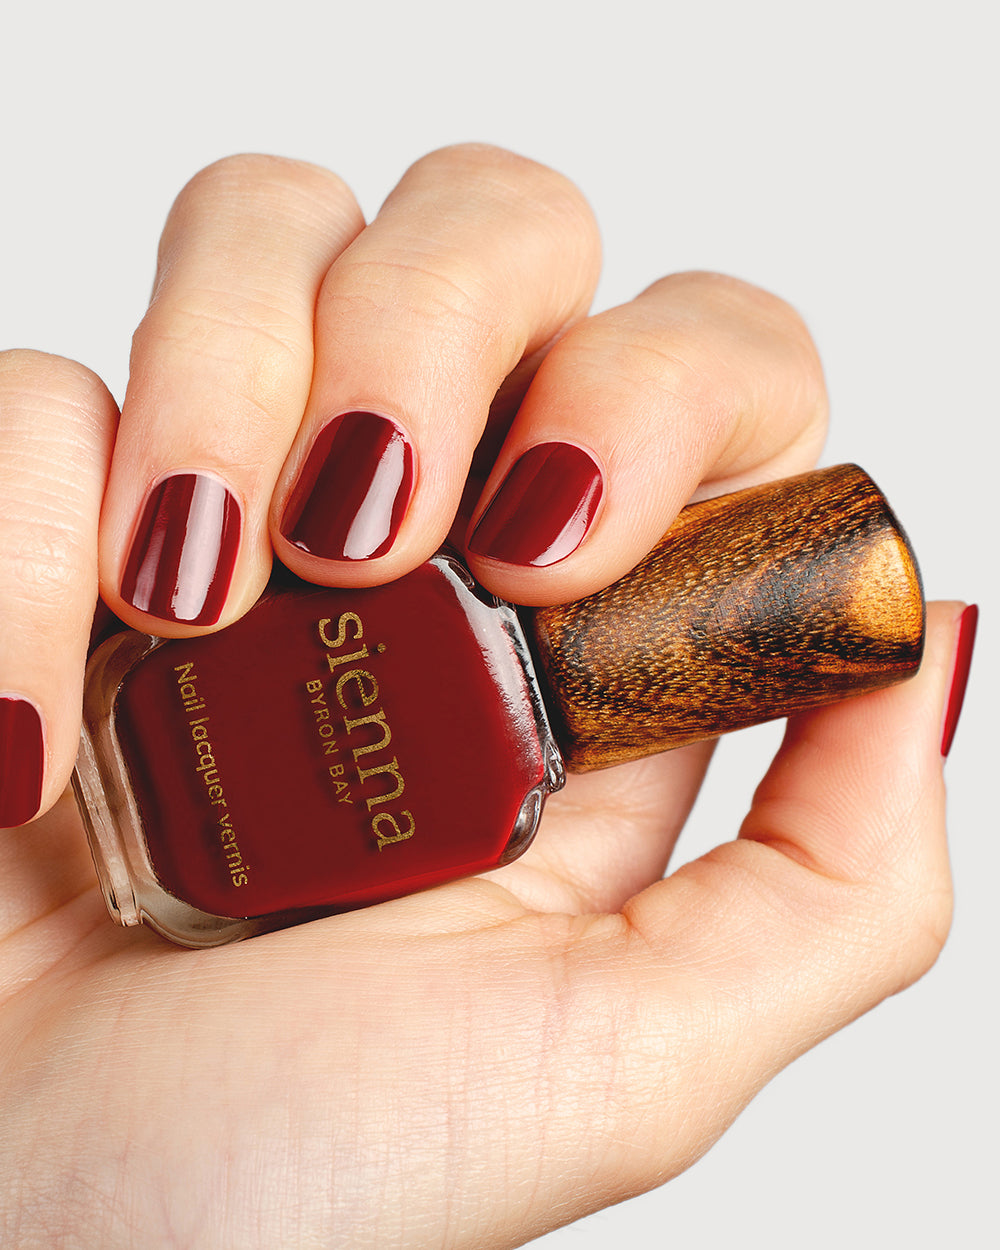 Organic mid-tone red nail polish hand swatch on fair skin tone up-close holding sienna bottle